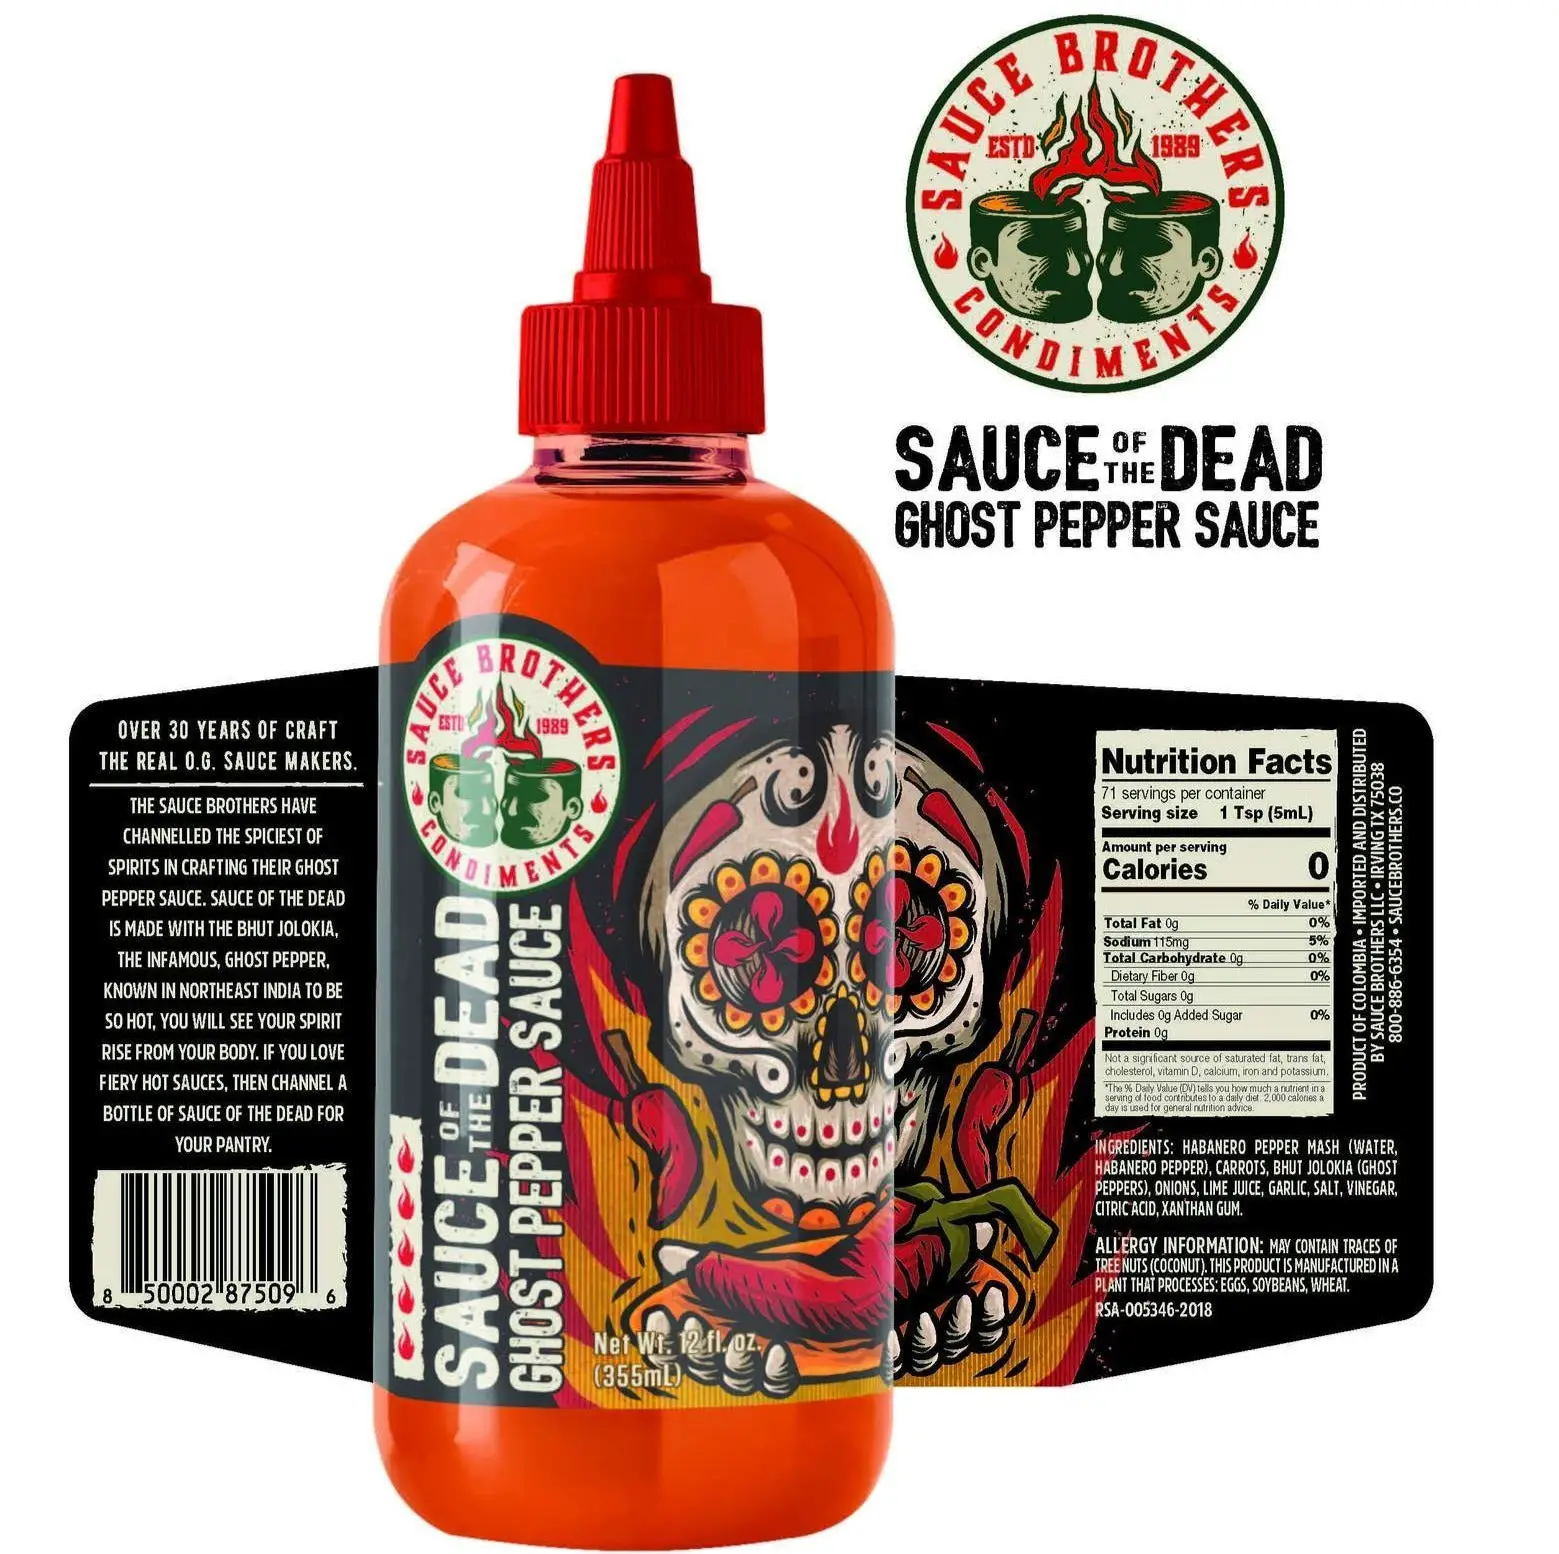 Sauce Brothers Sauce of the Dead Ghost Pepper Sauce